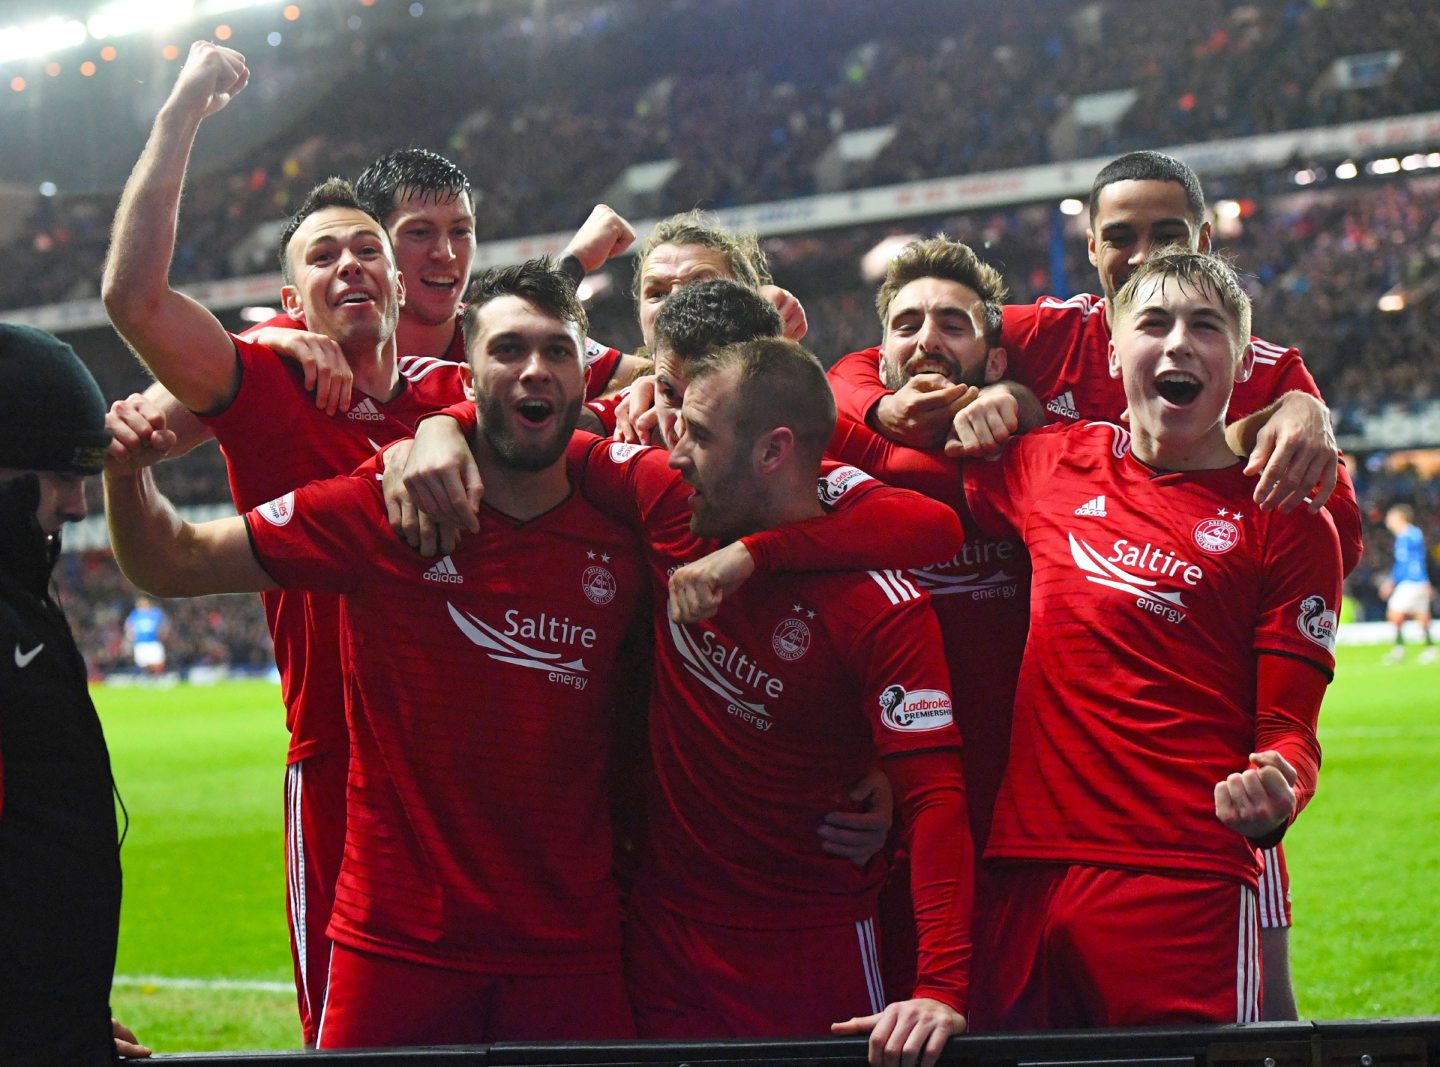 Aberdeen's Connor McLennan (left) celebrates his goal with team mates after scoring the second goal in a 2-0 Scottish Cup quarter-final defeat of Rangers at Ibrox in 2019. Image: SNS 